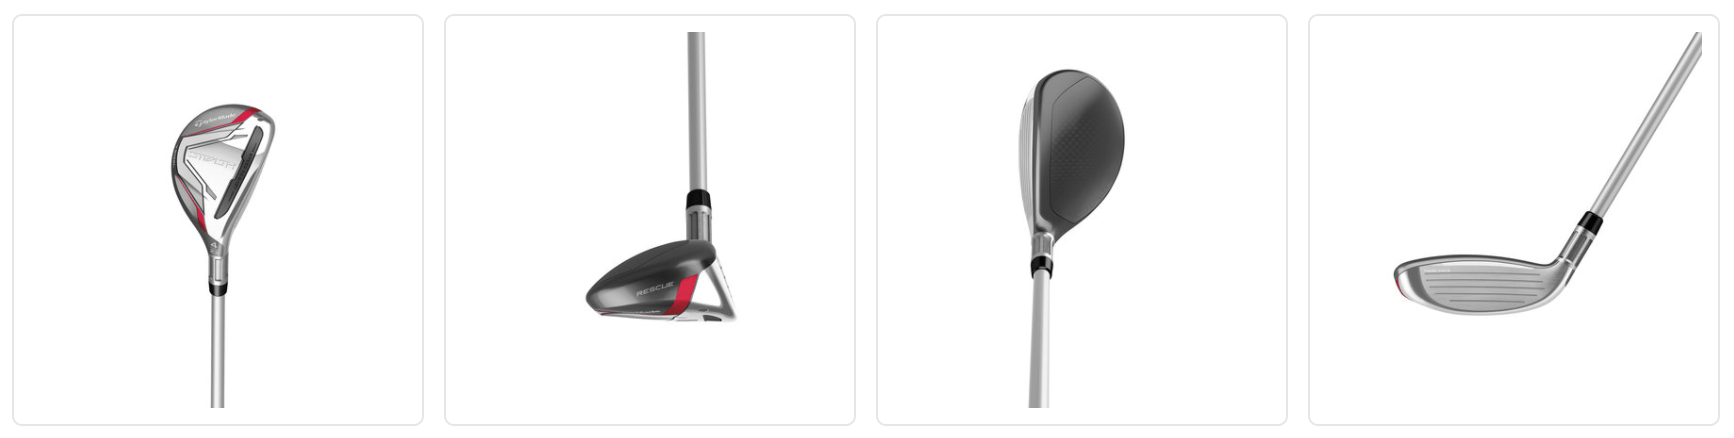 TaylorMade Golf Company Introduces the Stealth Family of Fairways and ...